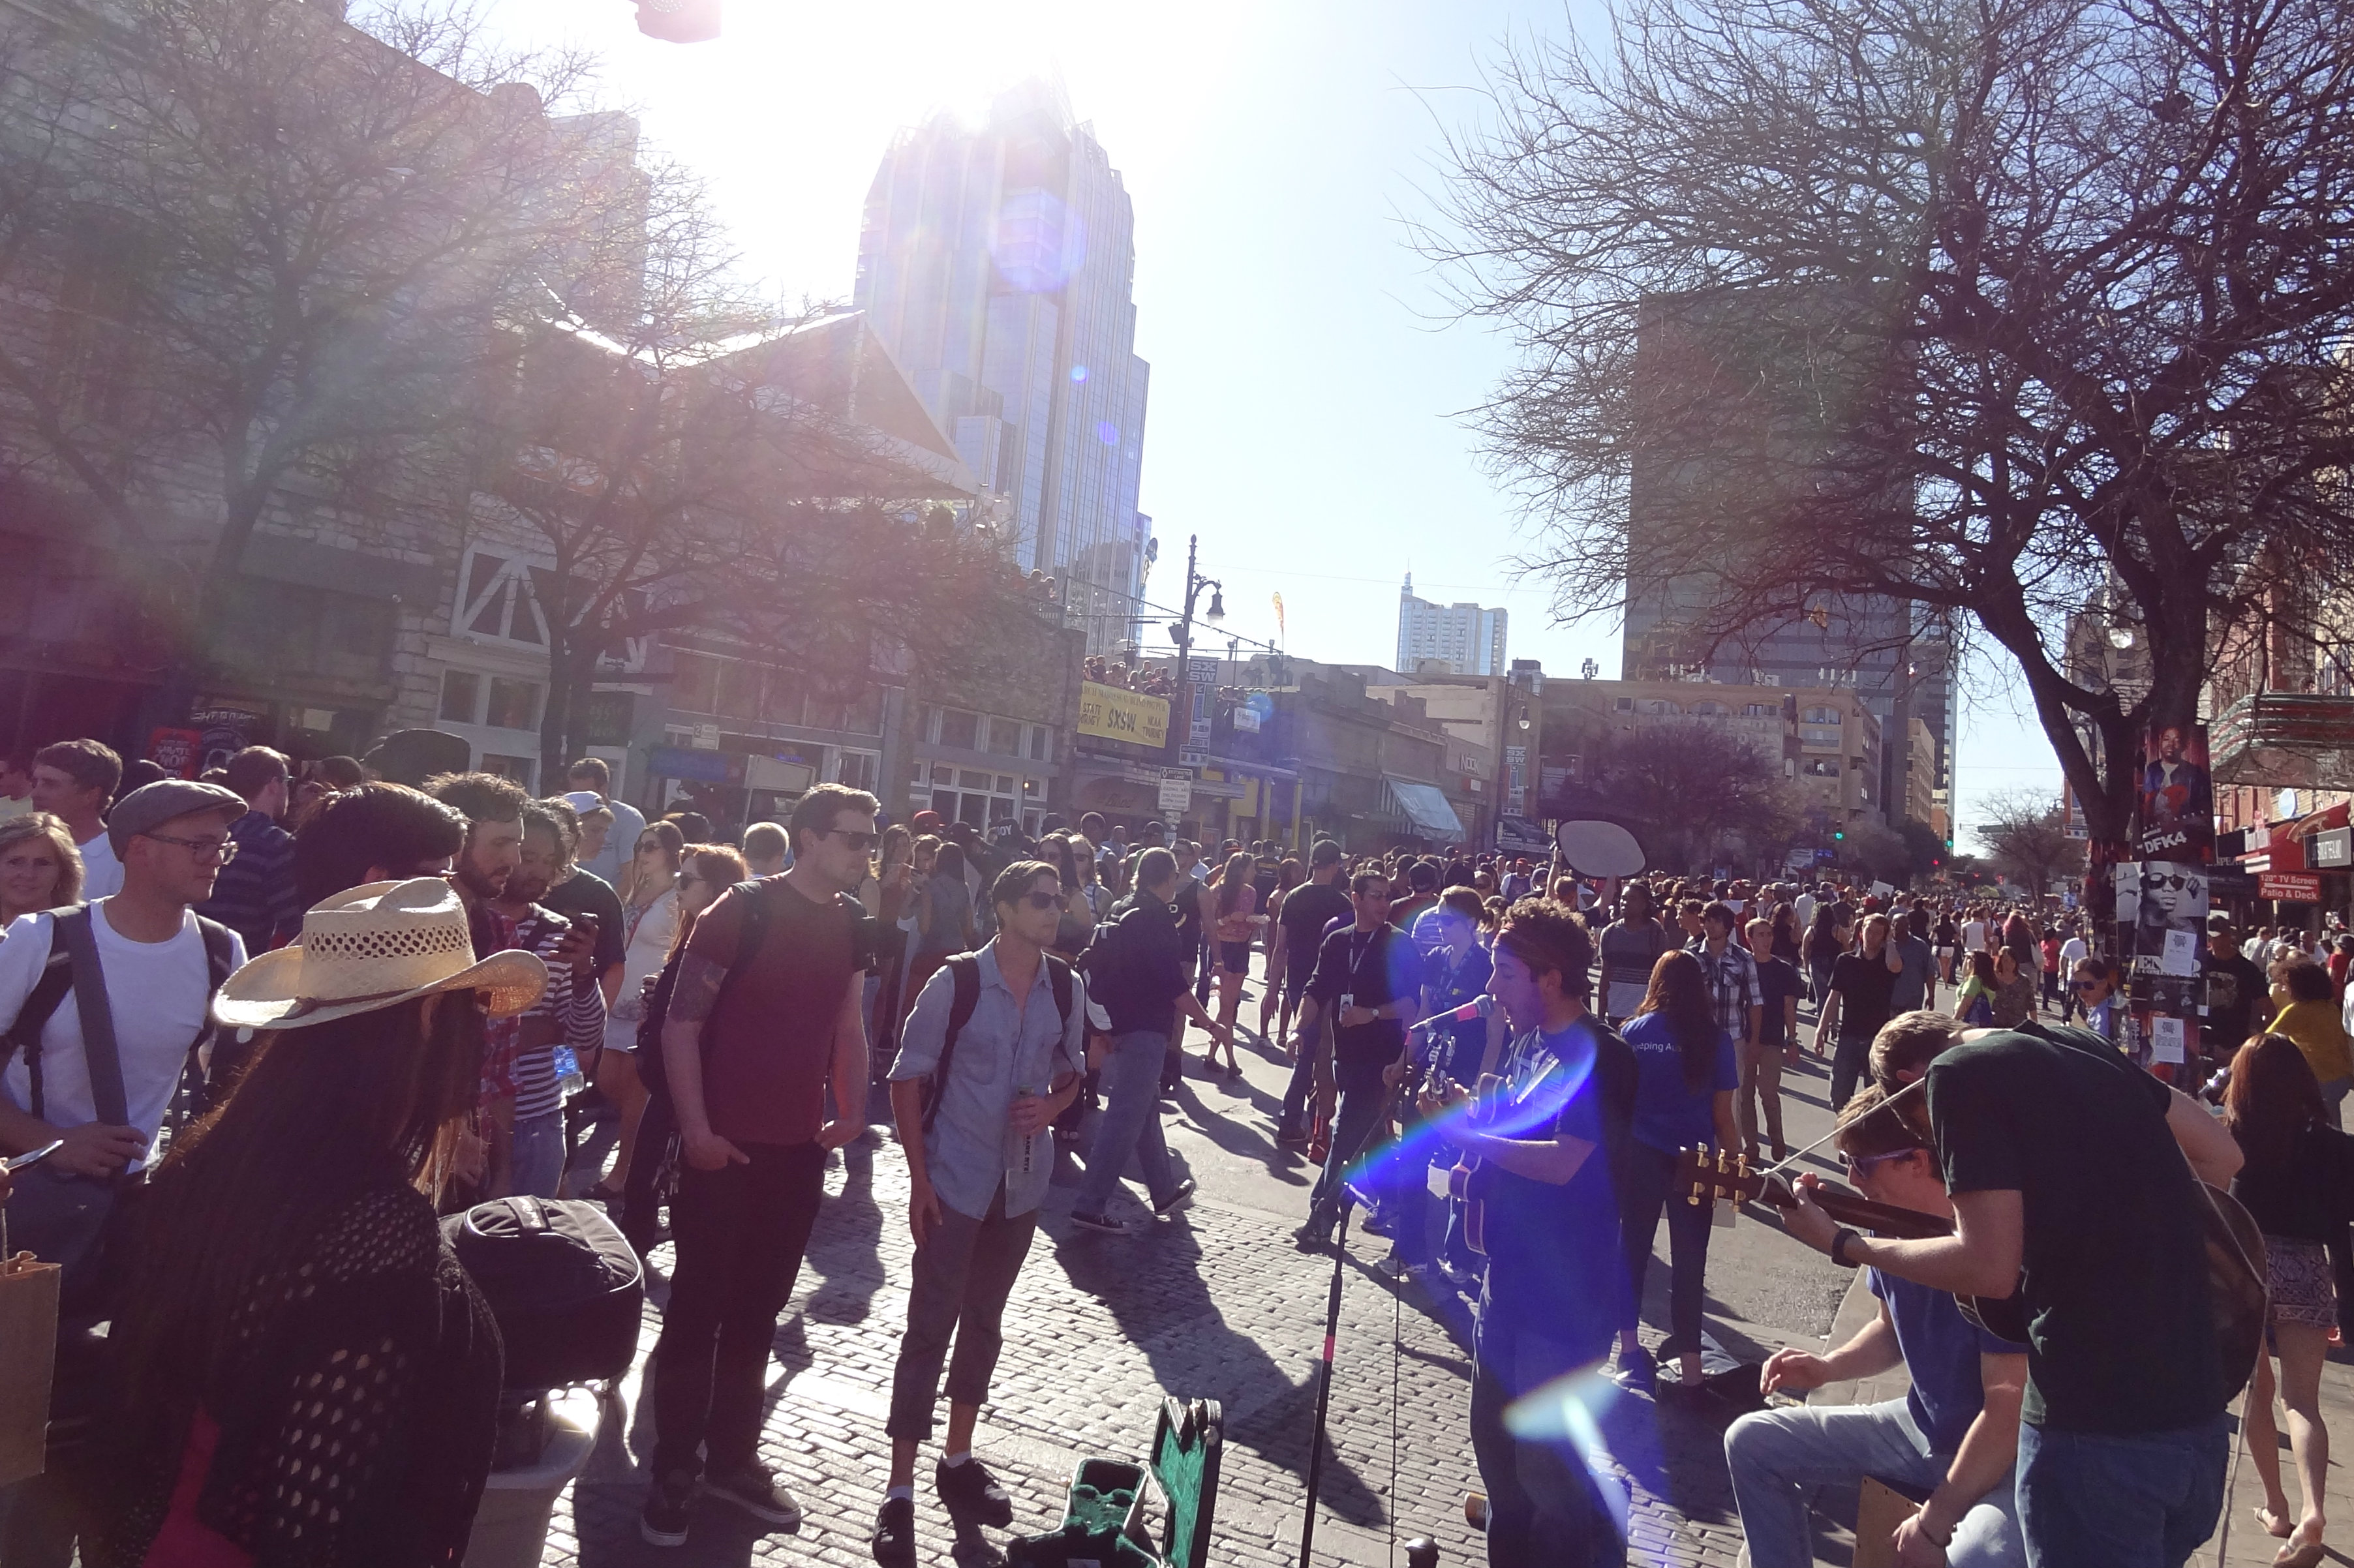 Photo: SXSW band performs in Sixth Street 3-2